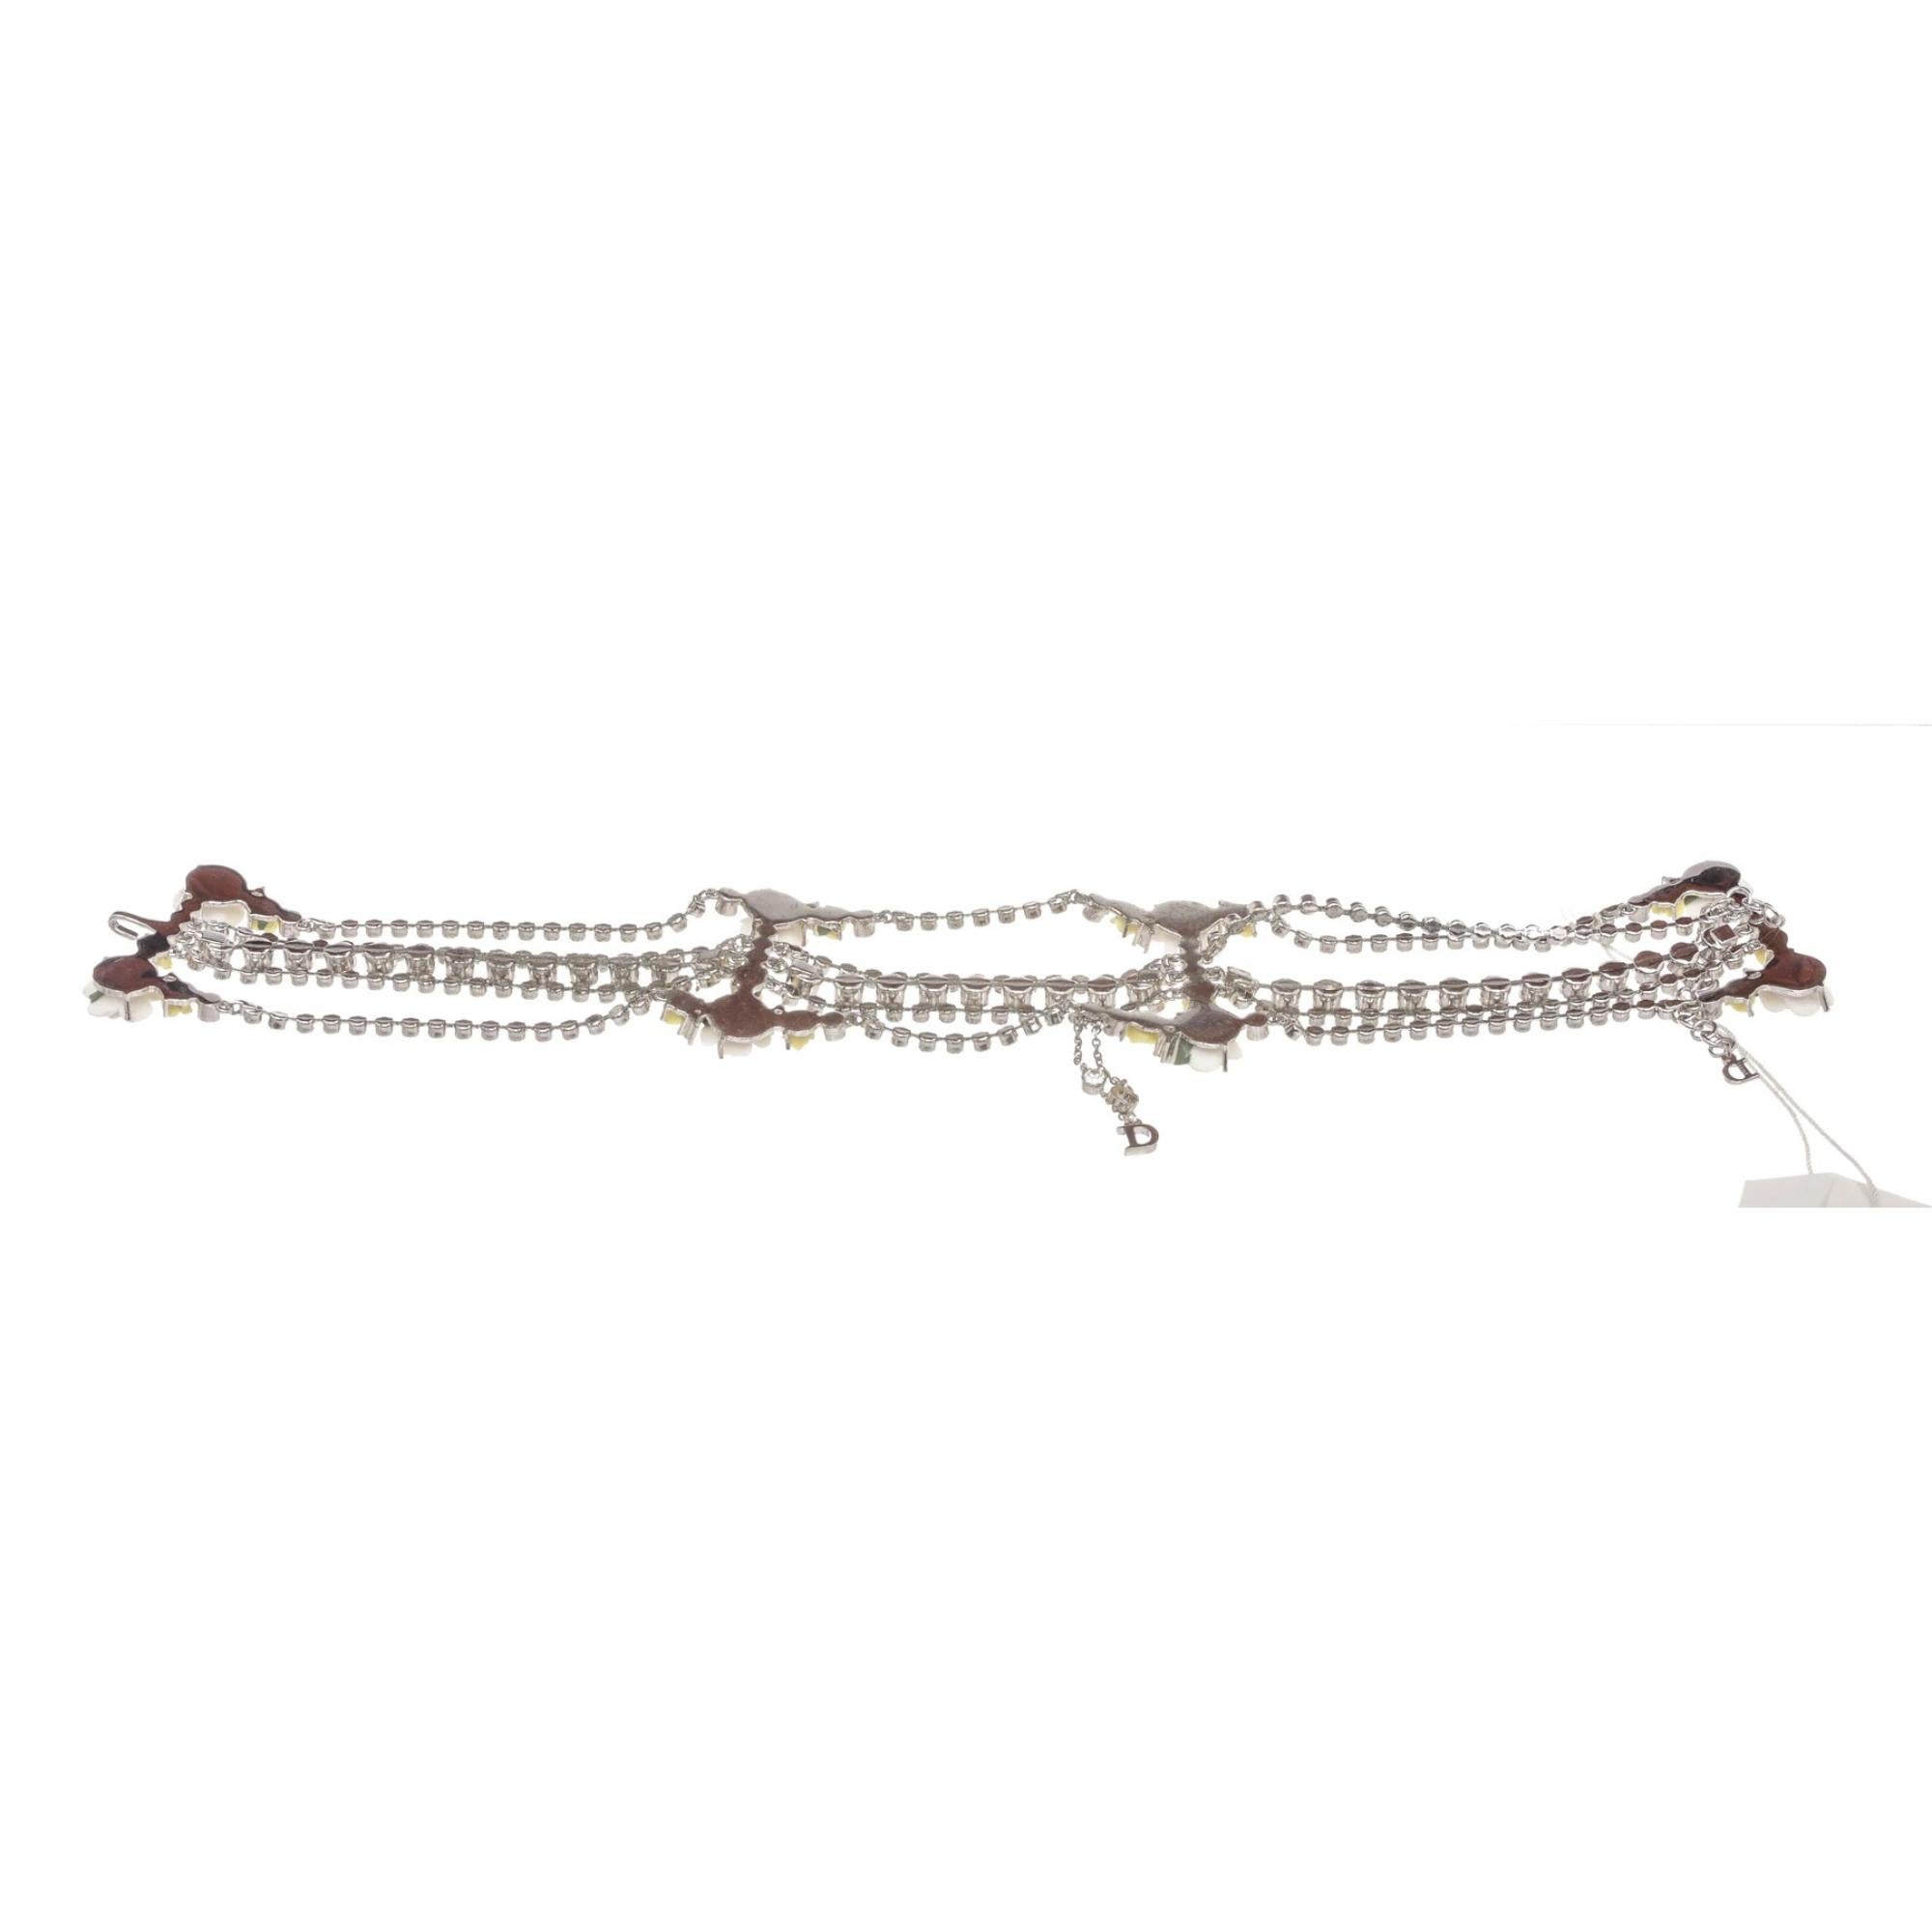 This Dior choker style necklace is from the early 2000s by Galliano. The choker is made of metal, crystal and resin. The piece features white and yellow flowers with five strands of crystals in silver with a silver CD logo charm hanging from the